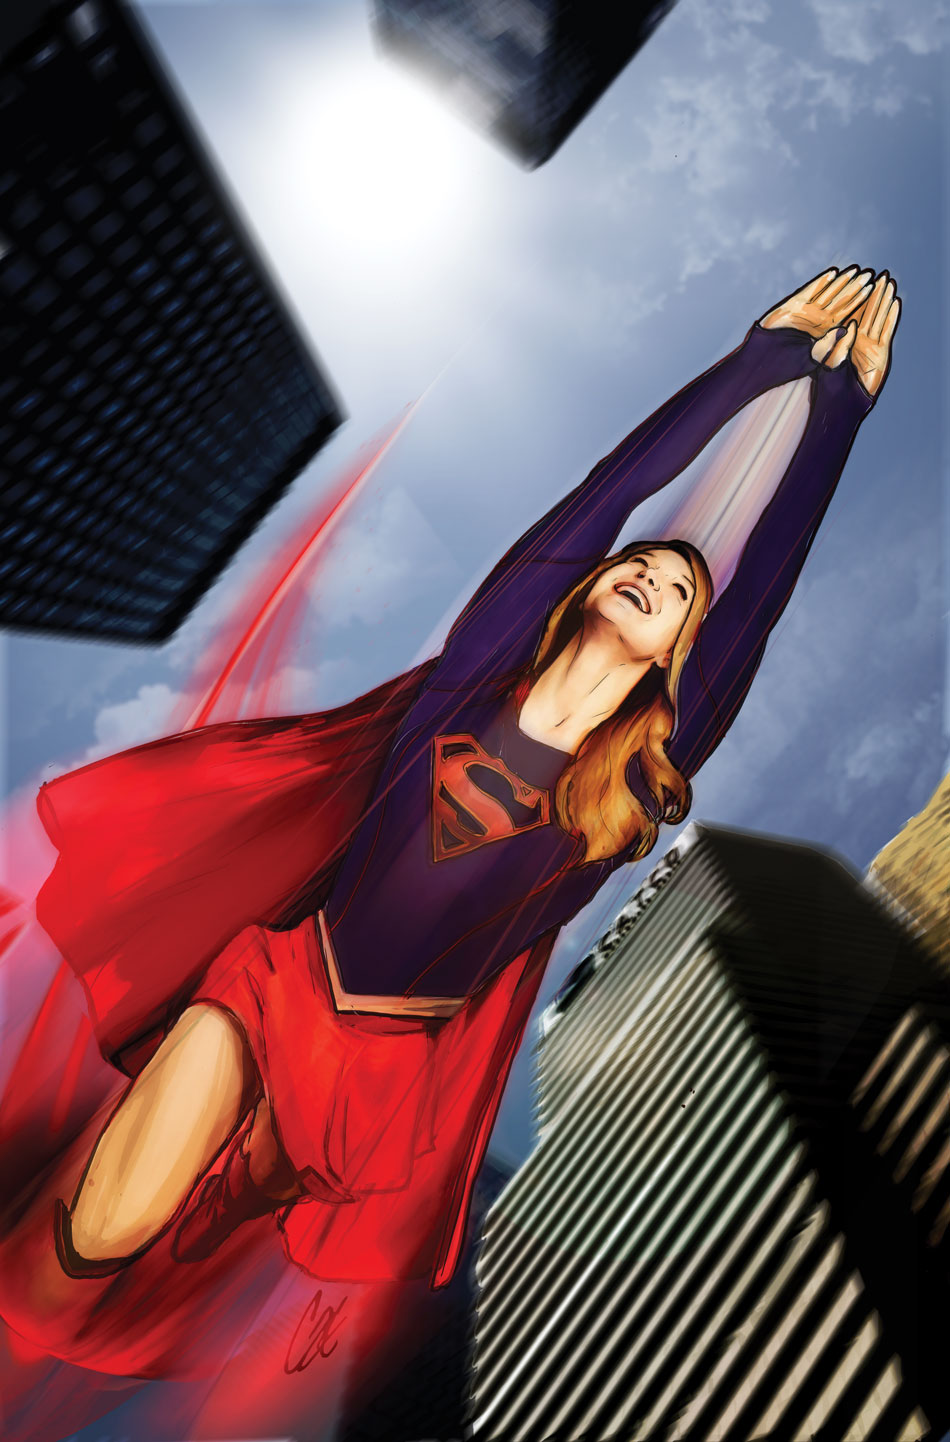 [Press Release] The Adventures of Supergirl goes to print and will ship twice-monthly for $2.99!